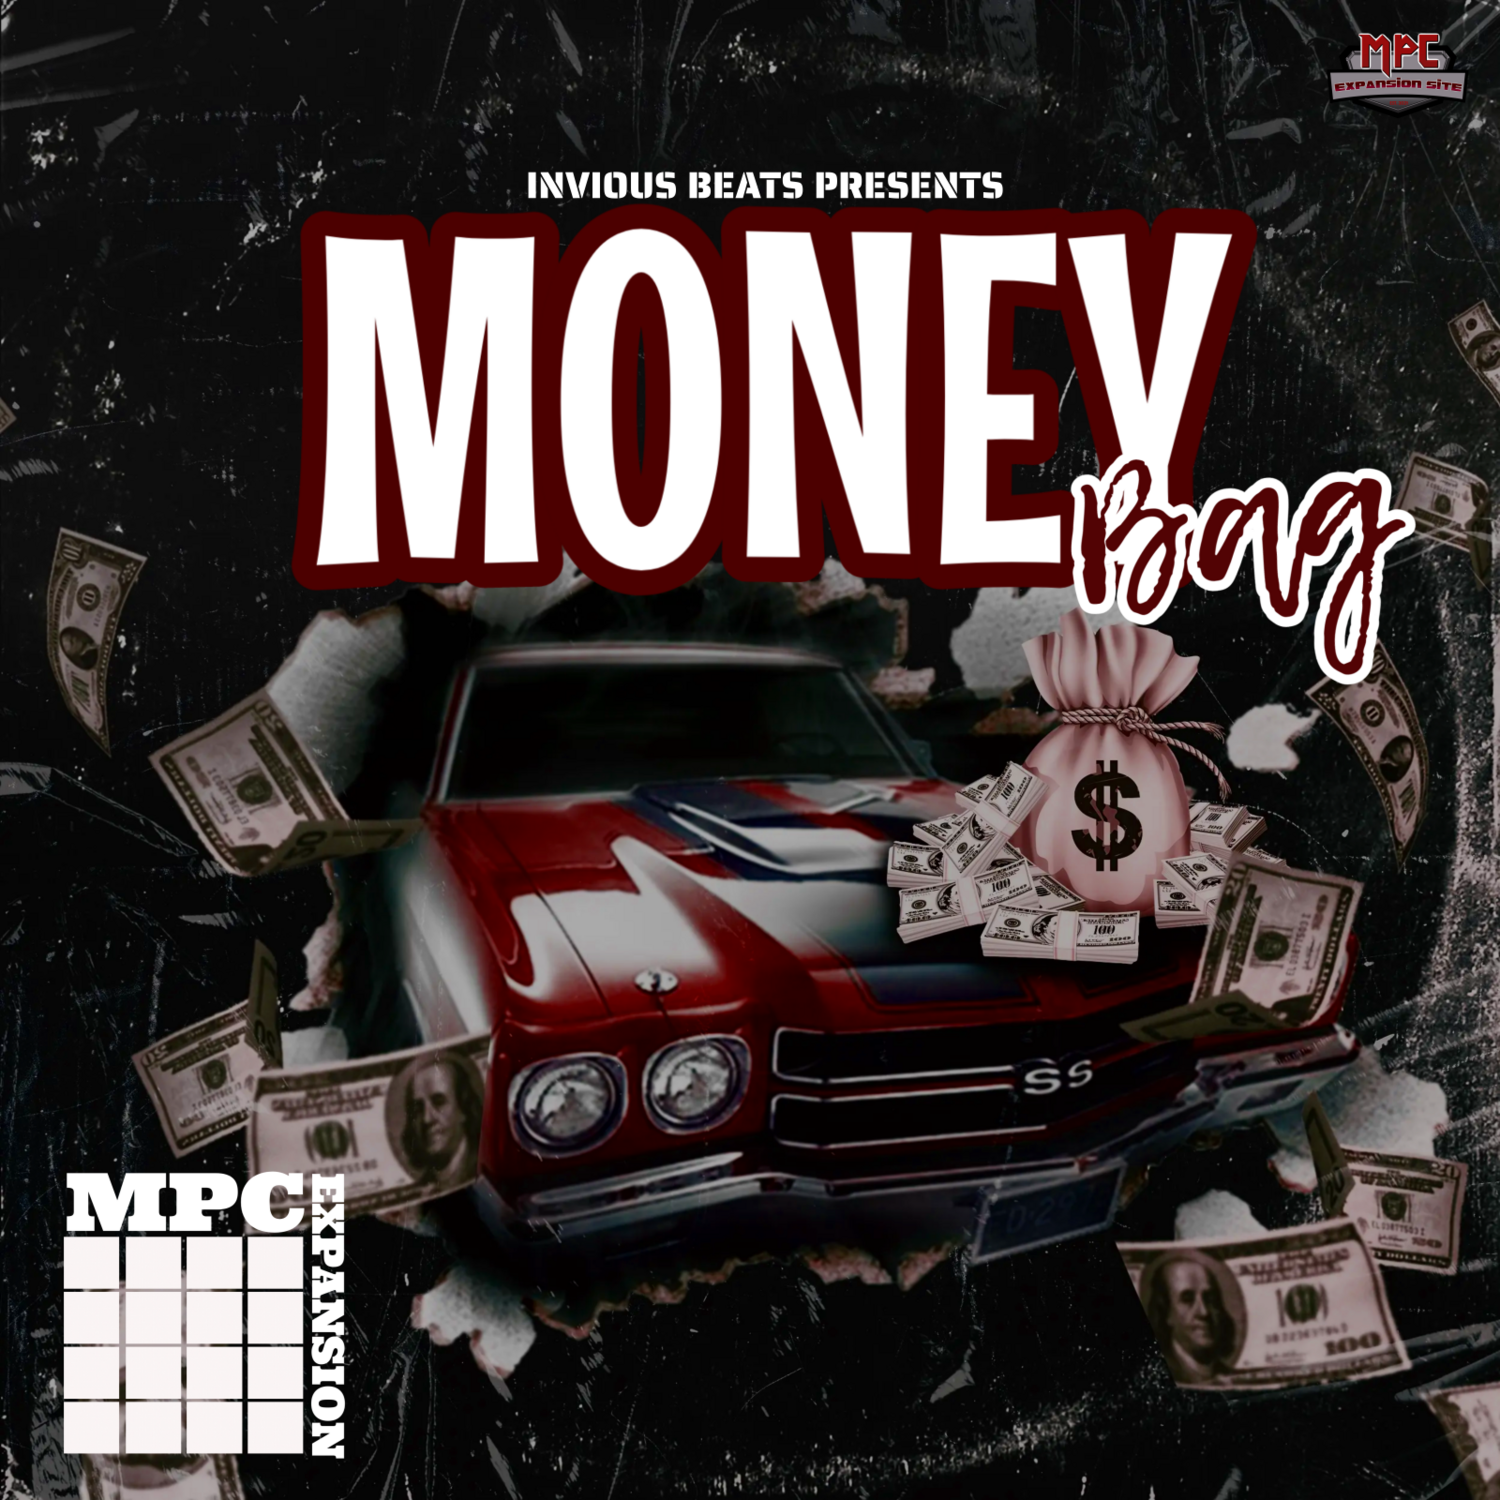 MPC EXPANSION 'MONEY BAG' by INVIOUS